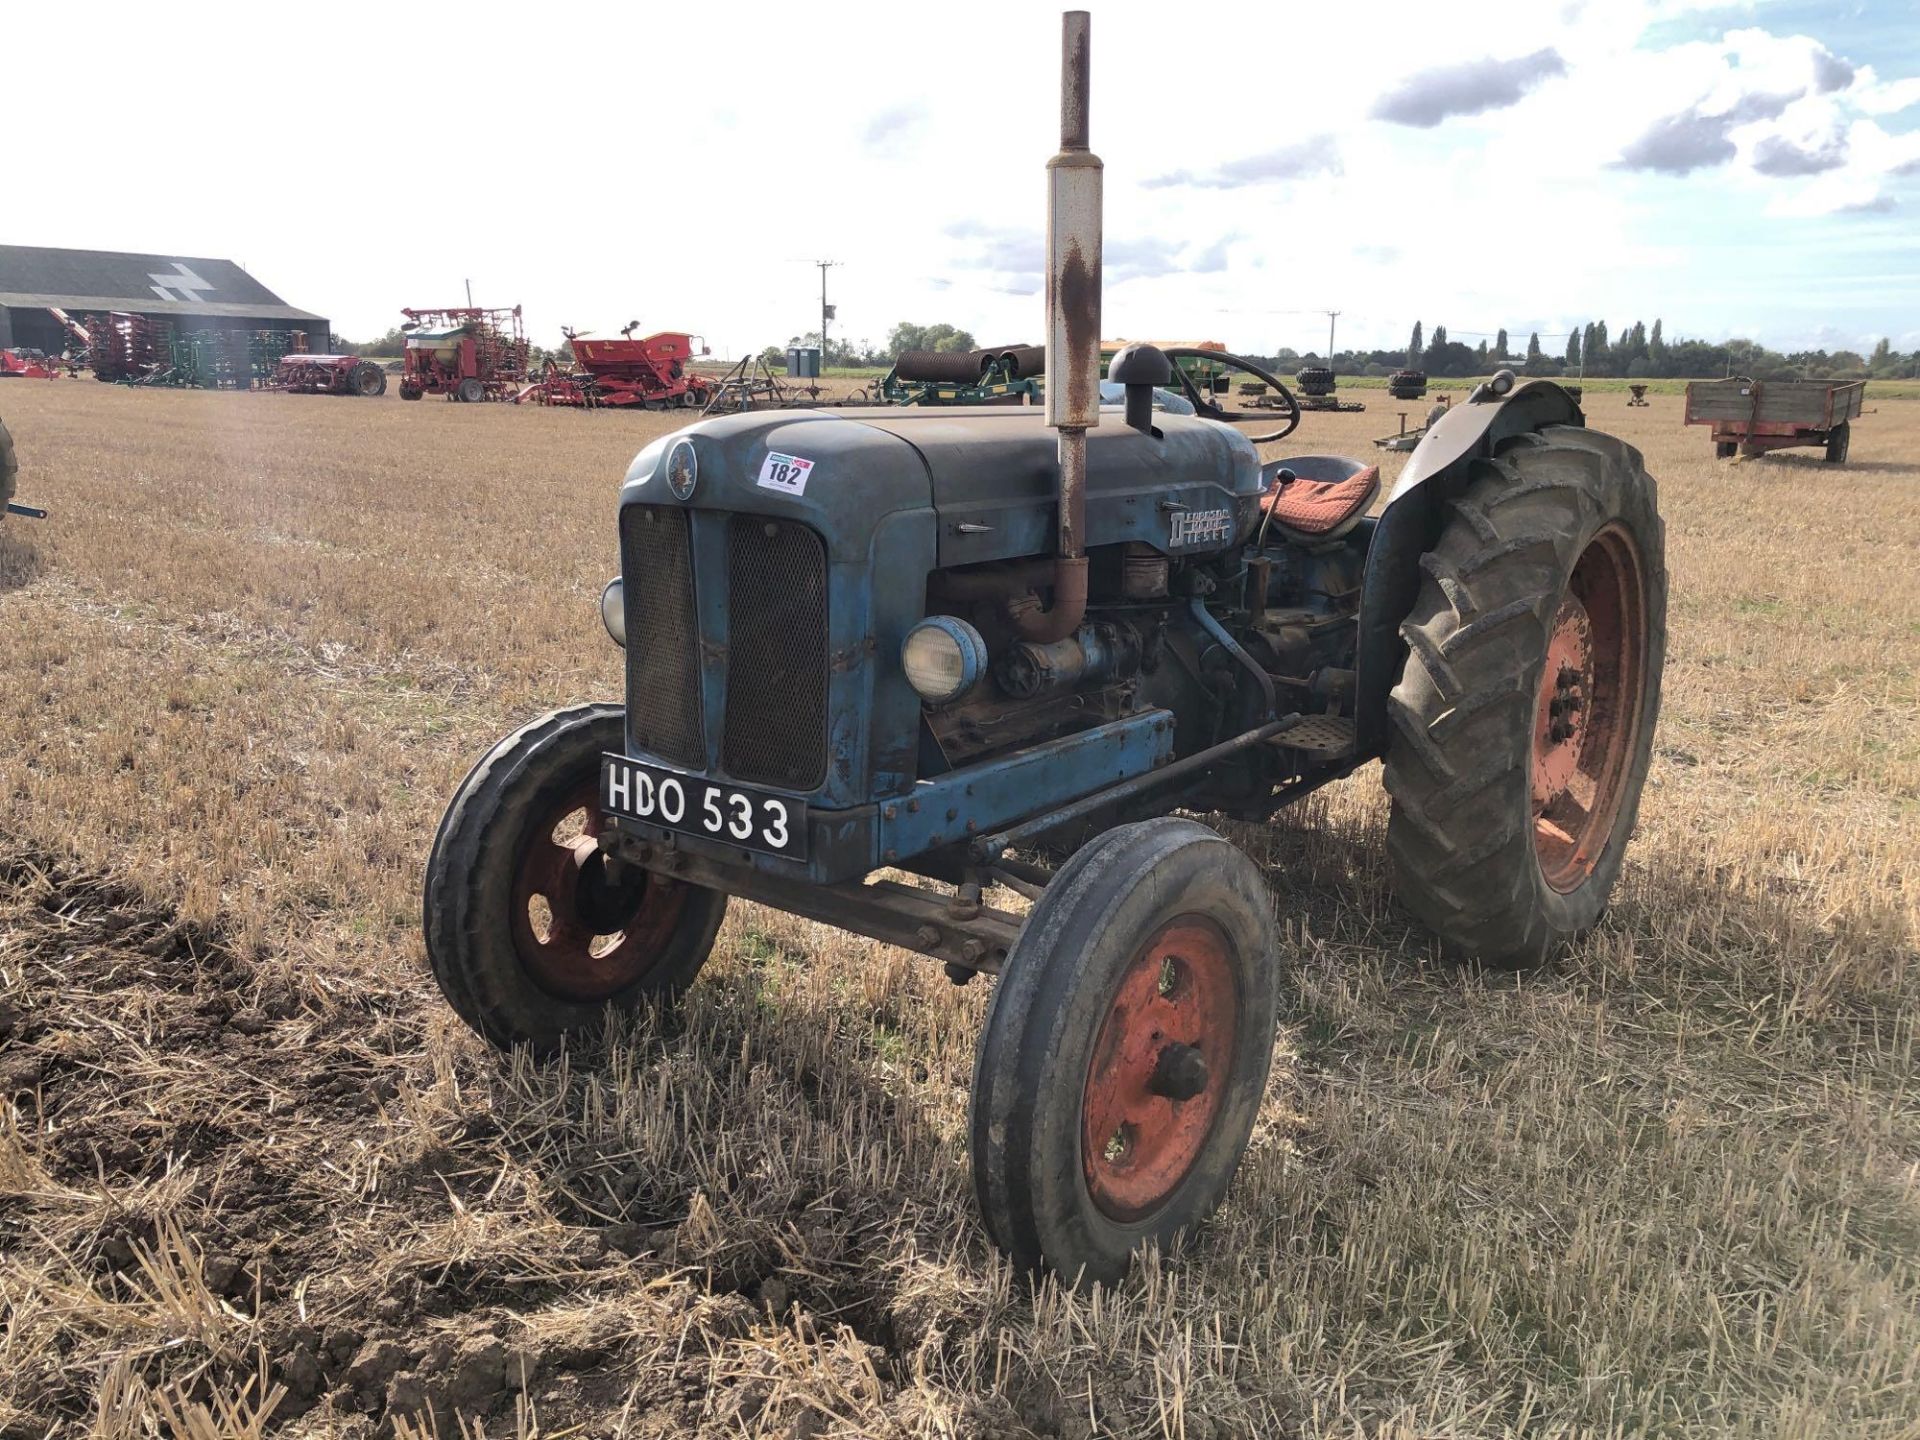 1955 Fordson Major diesel 2wd tractor with side belt pulley, rear linkage and drawbar on 6.00-19 fro - Image 2 of 6